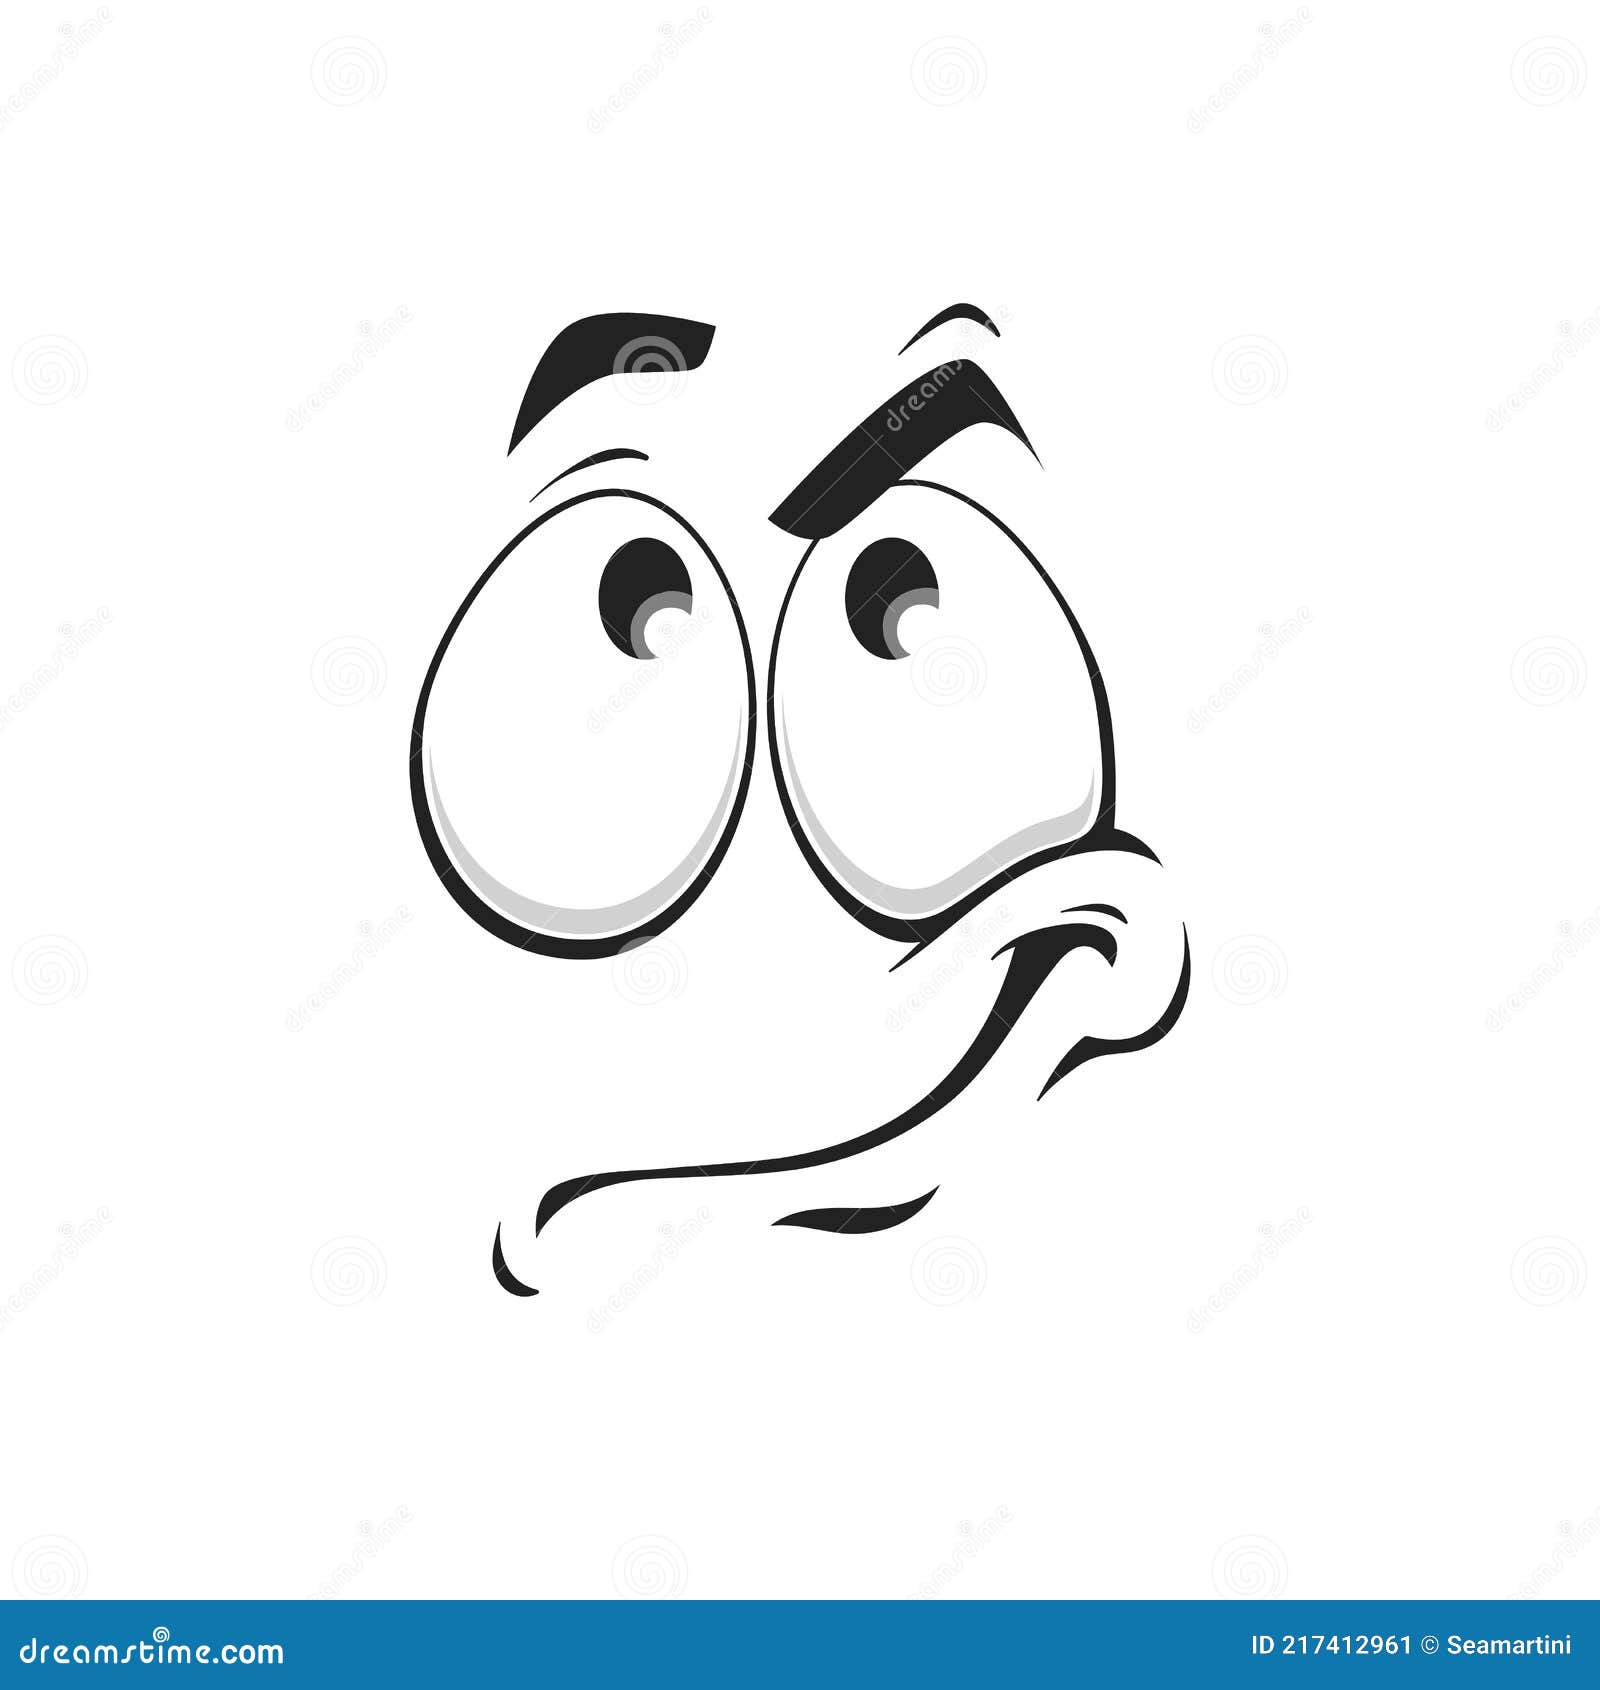 cartoon-face-vector-icon-funny-thinking-emoji-thoughtful-tense-facial-expression-eyes-looking-up-smart-feelings-isolated-217412961.jpg